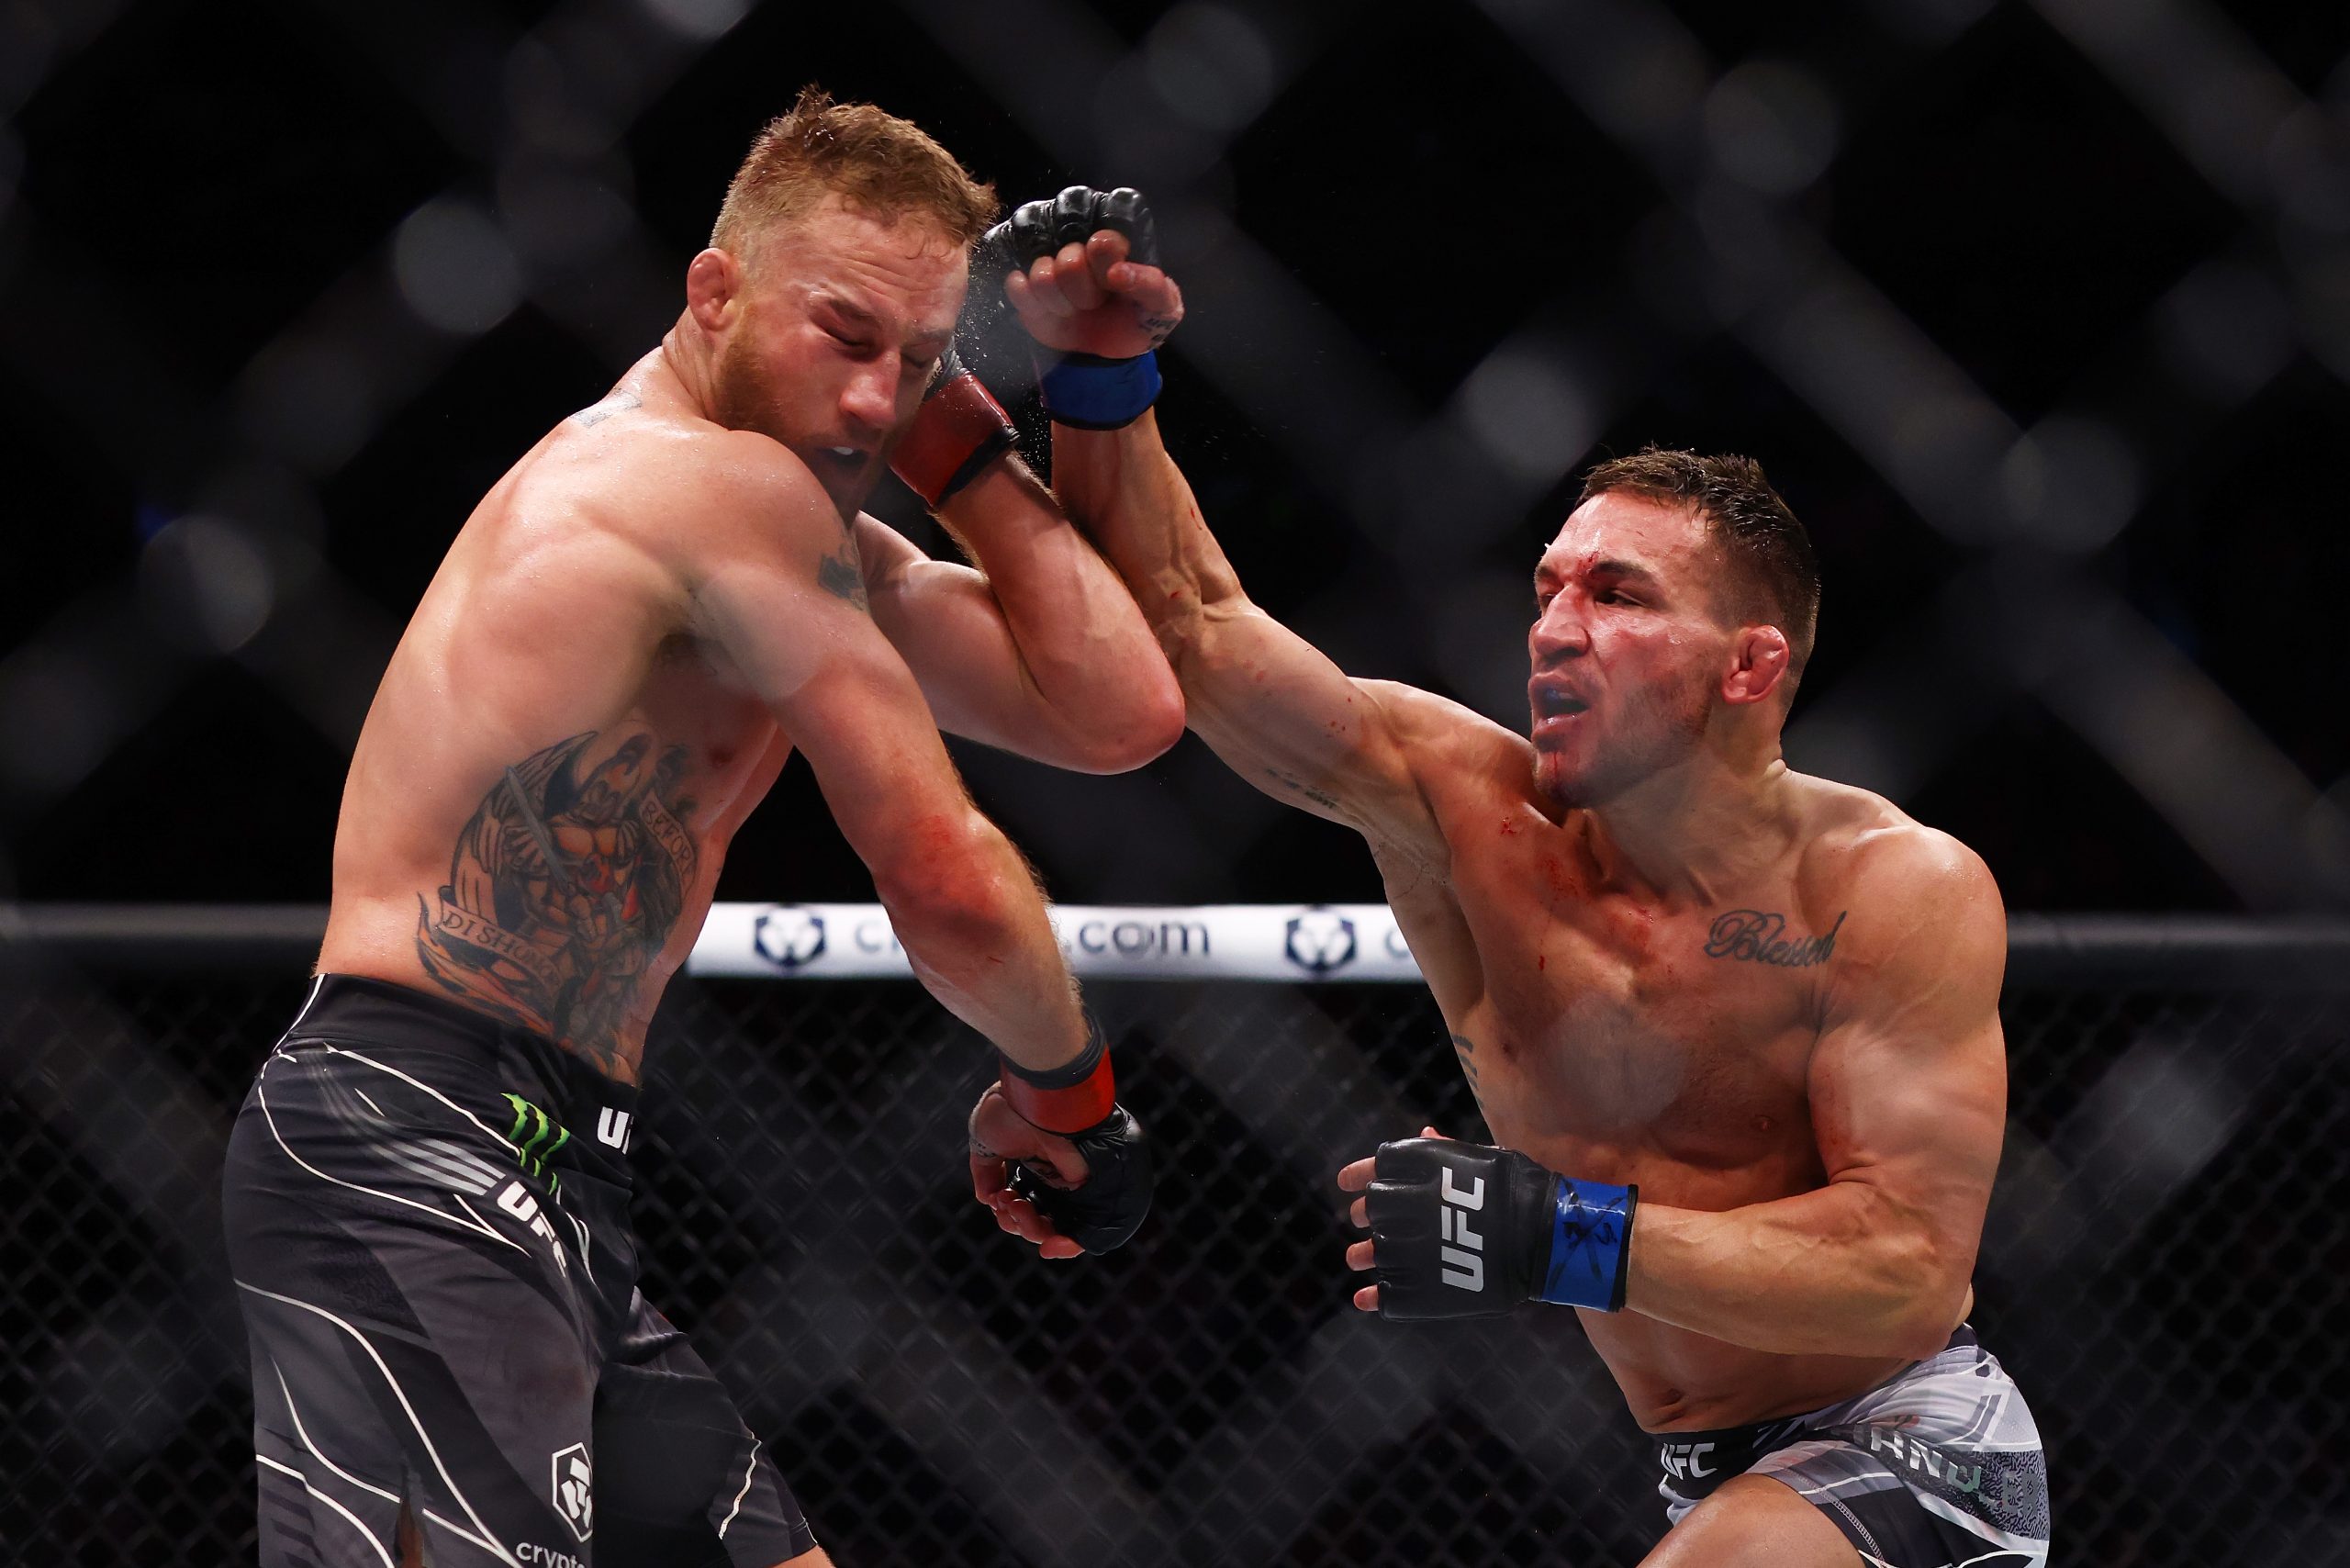 Michael Chandler and Justin Gaethje were taken to hospital thanks to an update after UFC 268